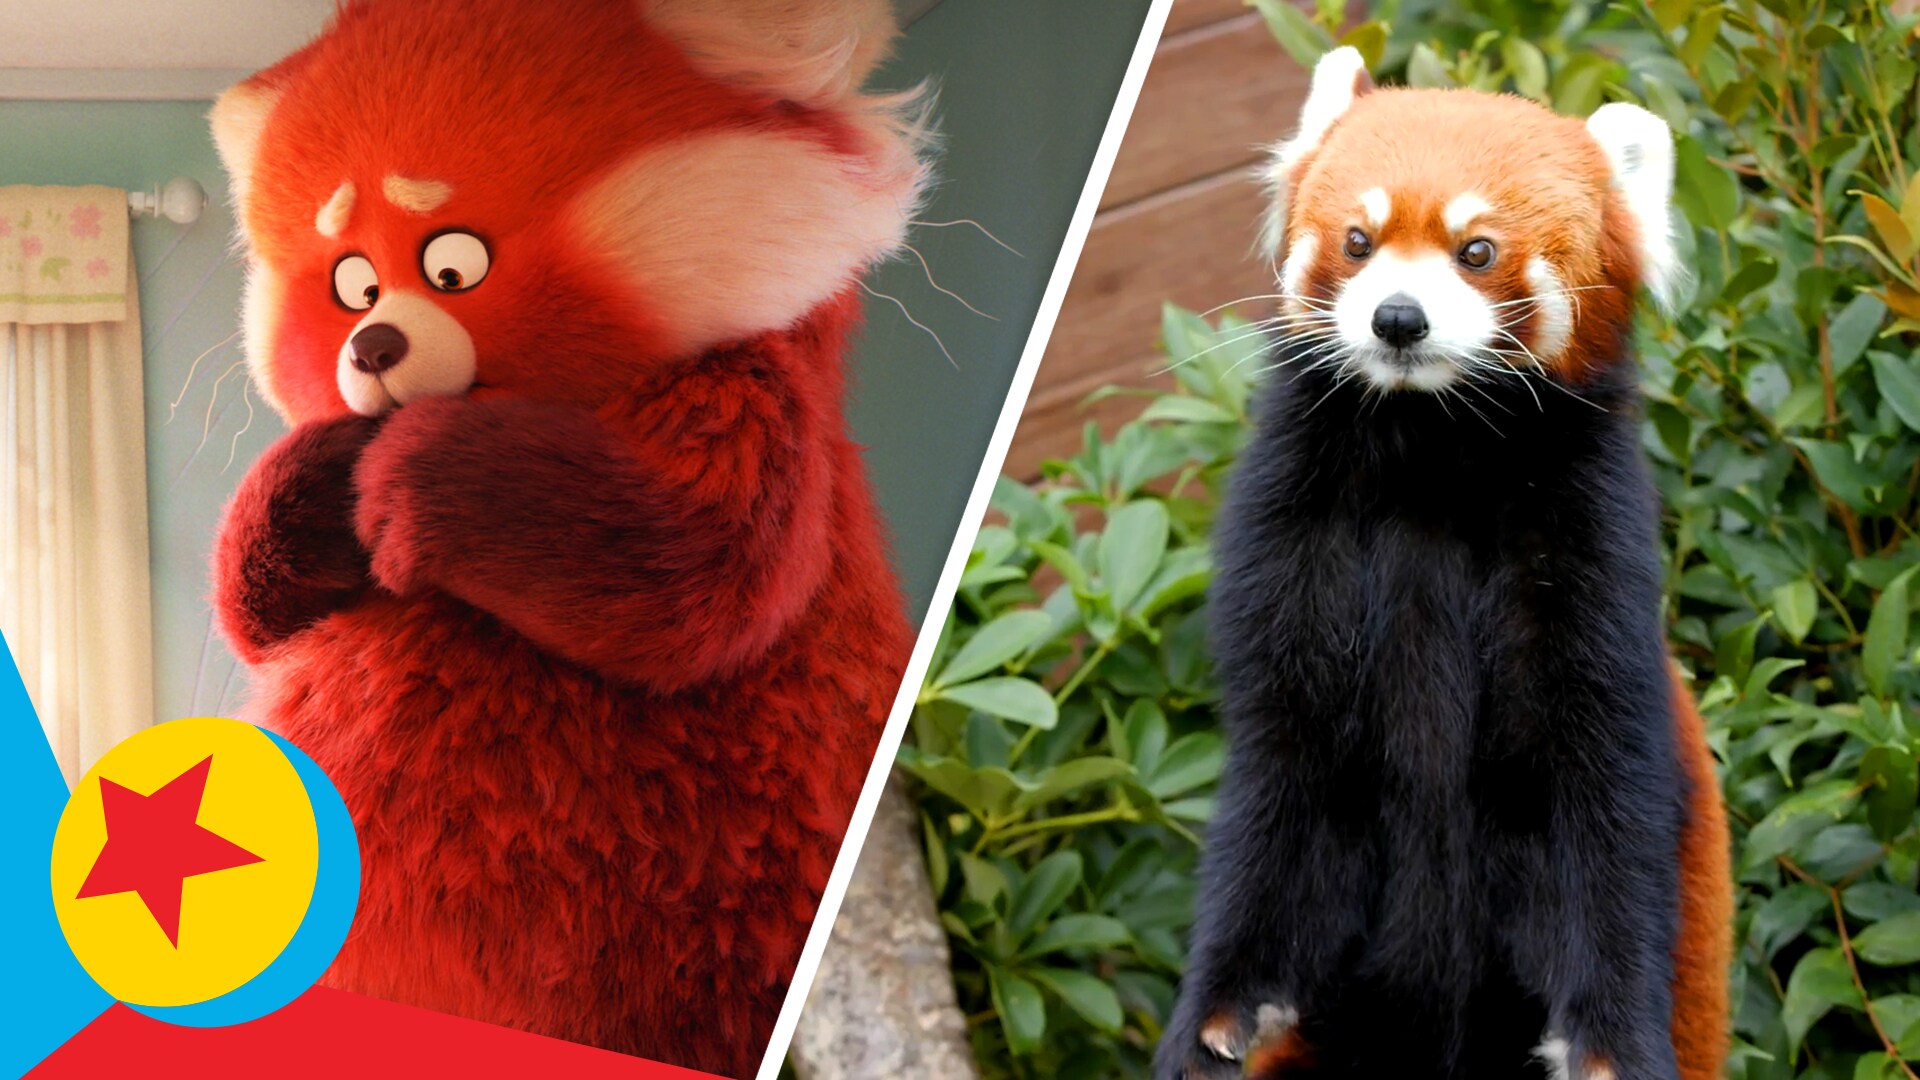 Turning Red Real Life Side-By-Side | Pixar